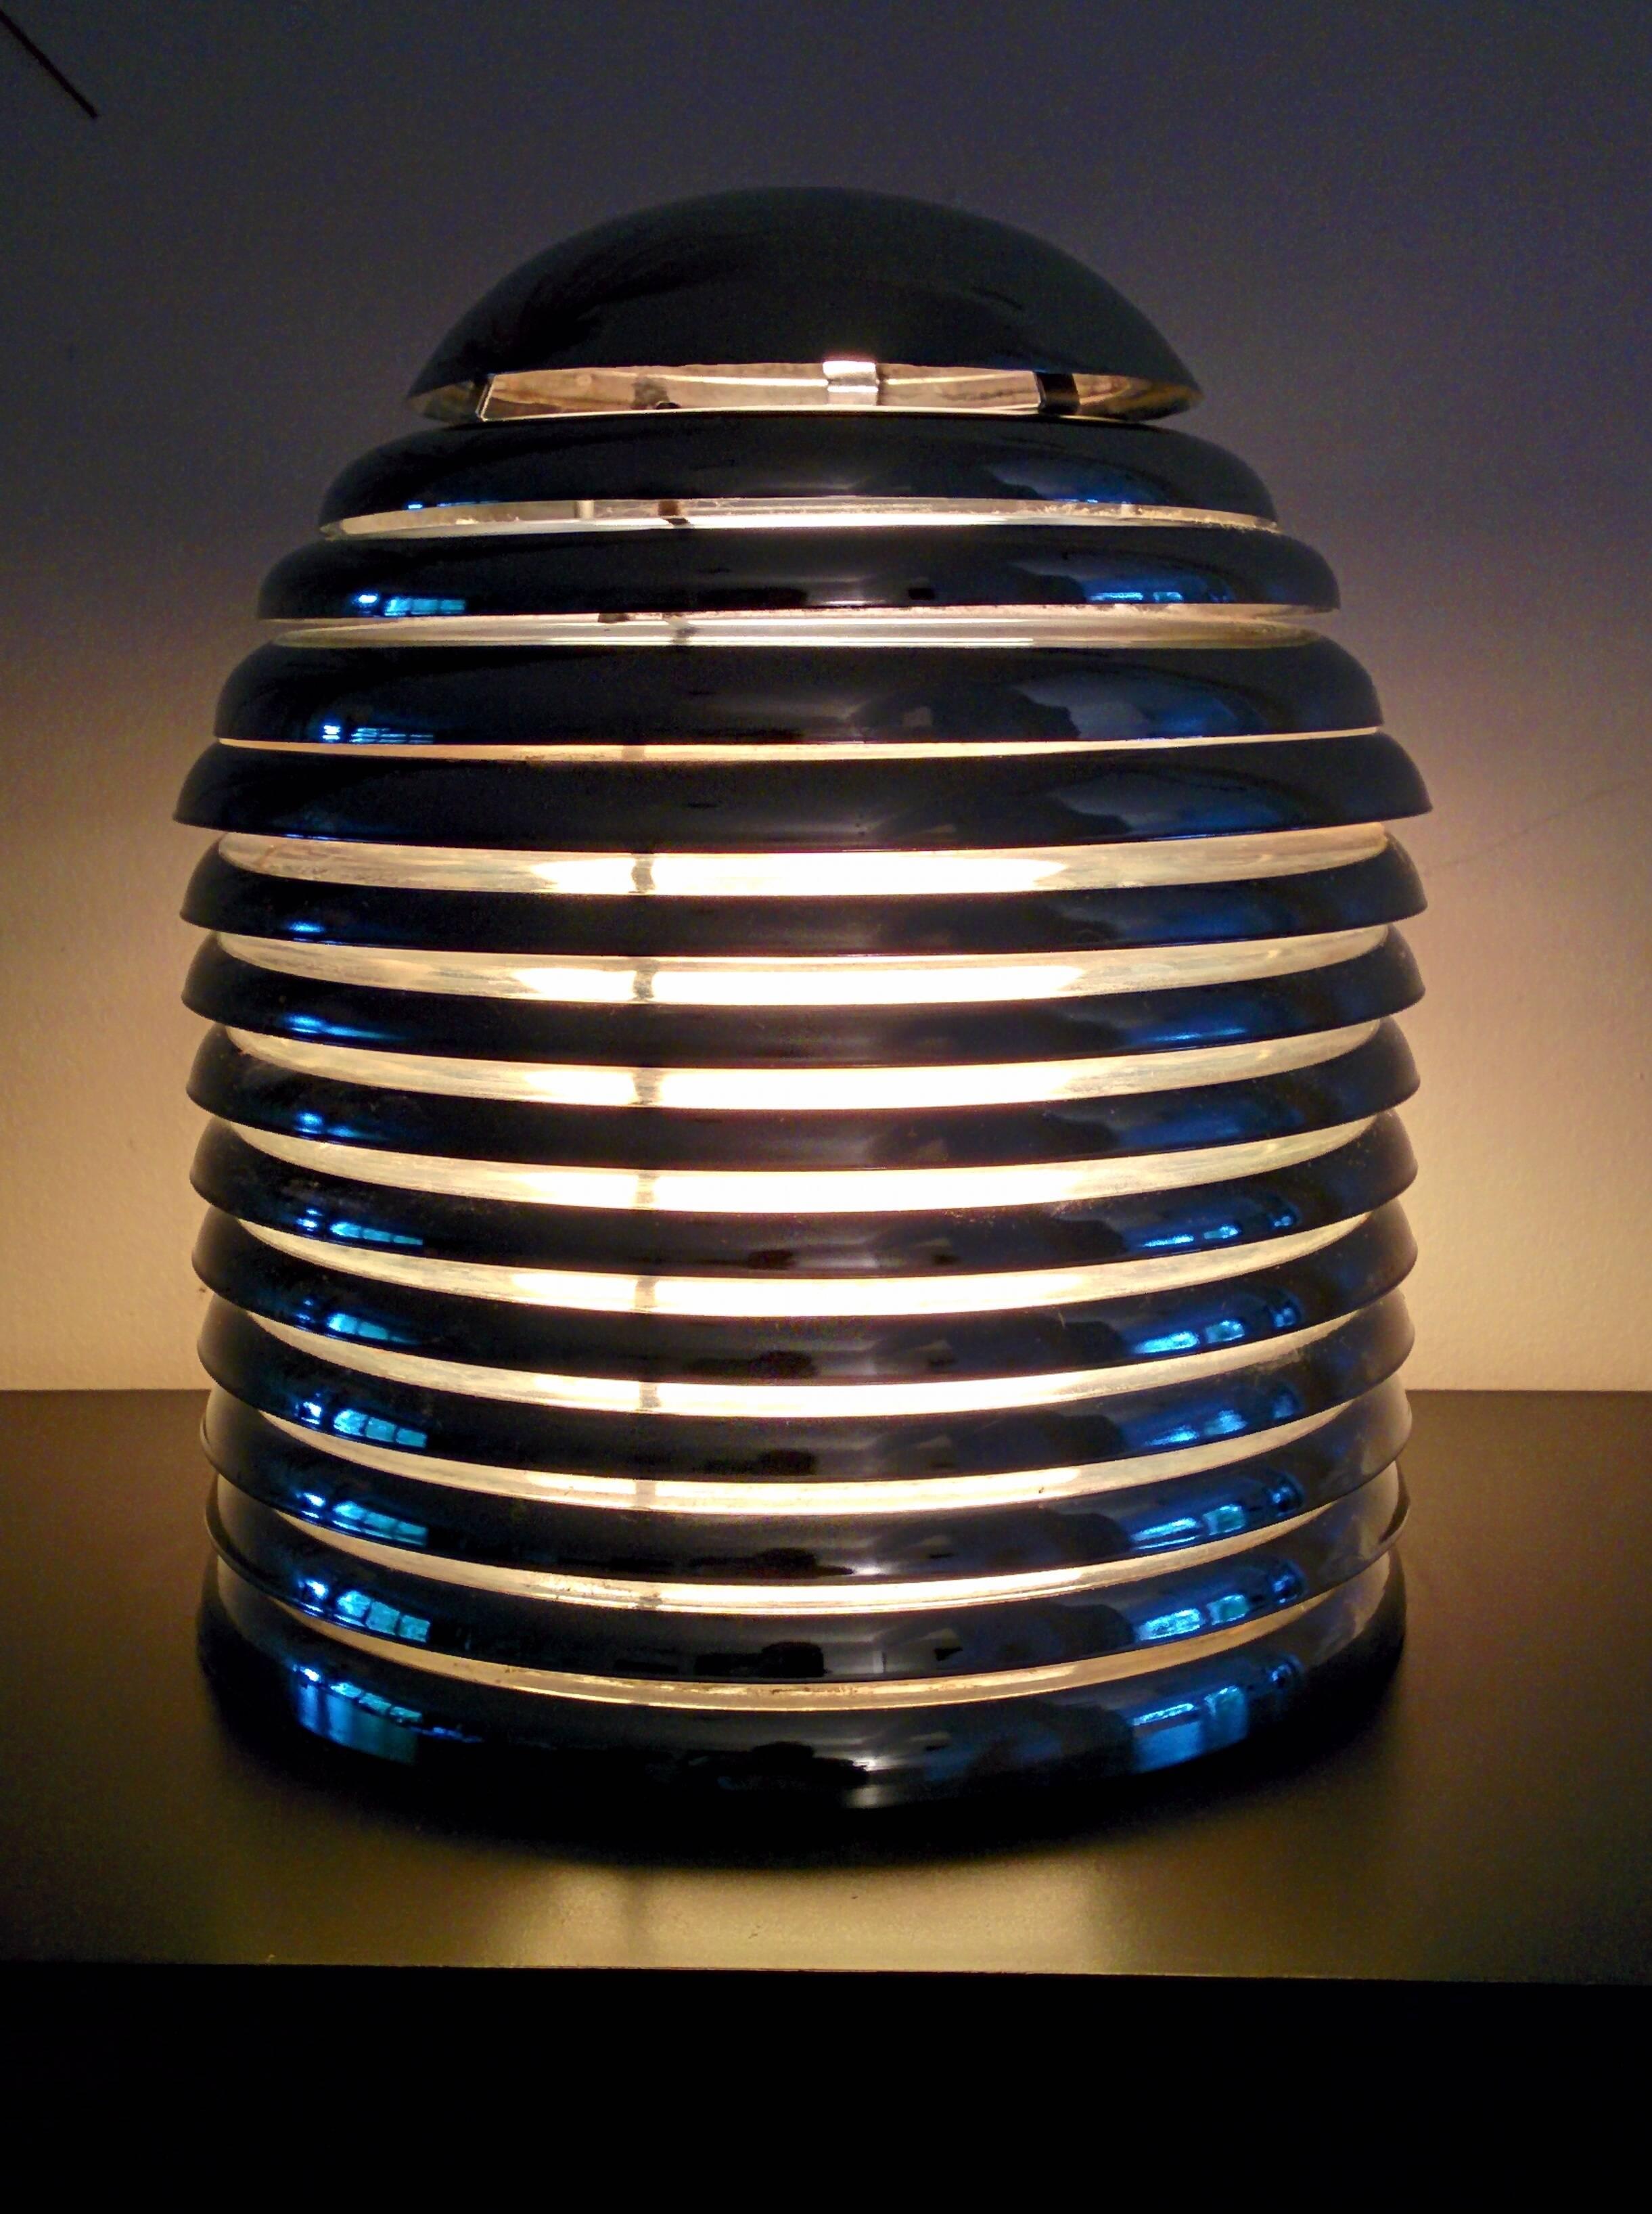 Louvered table lamp with convex chrome disk. 

Removable top permit access to lightbulb. 

Original 1970s North American wiring with on or off rotating switch on cord. 

13 inches high by 11 inches wide.

